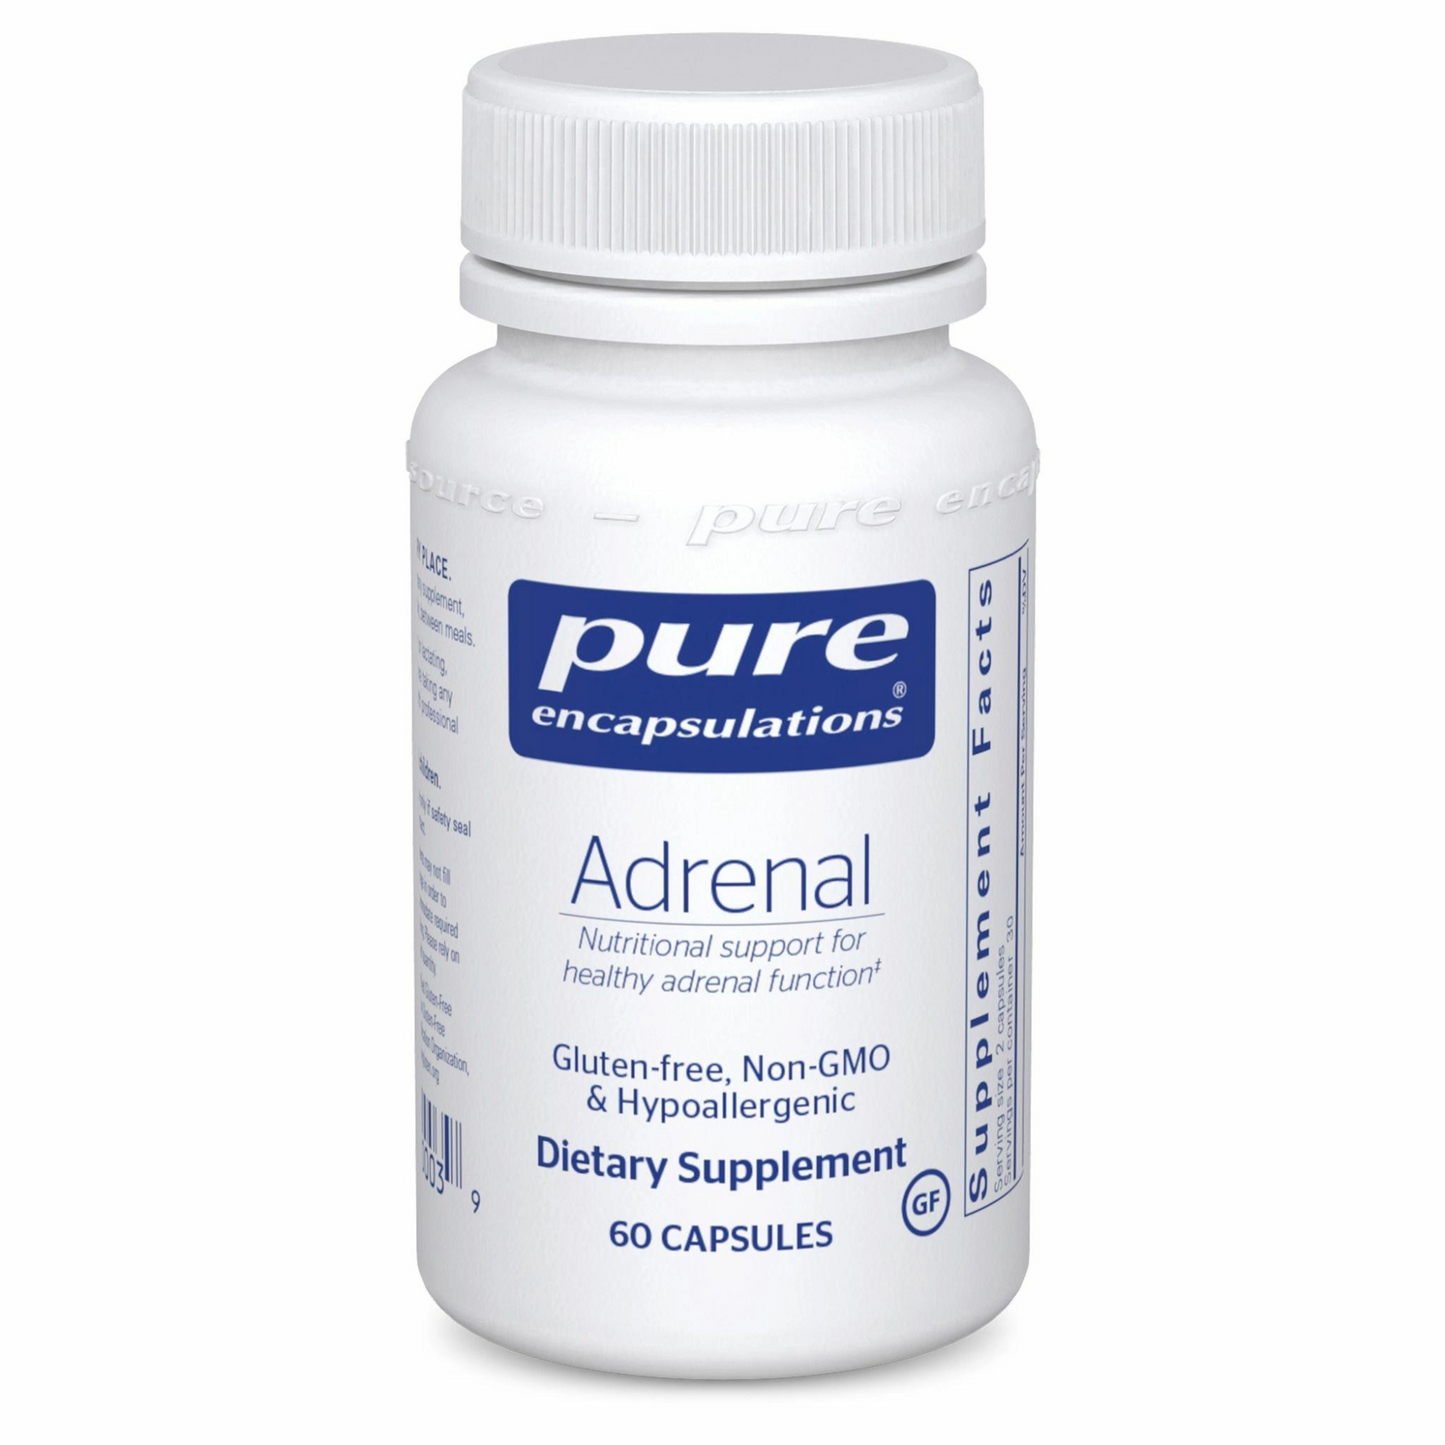 Primary Image of Adrenal Capsules (60 count)